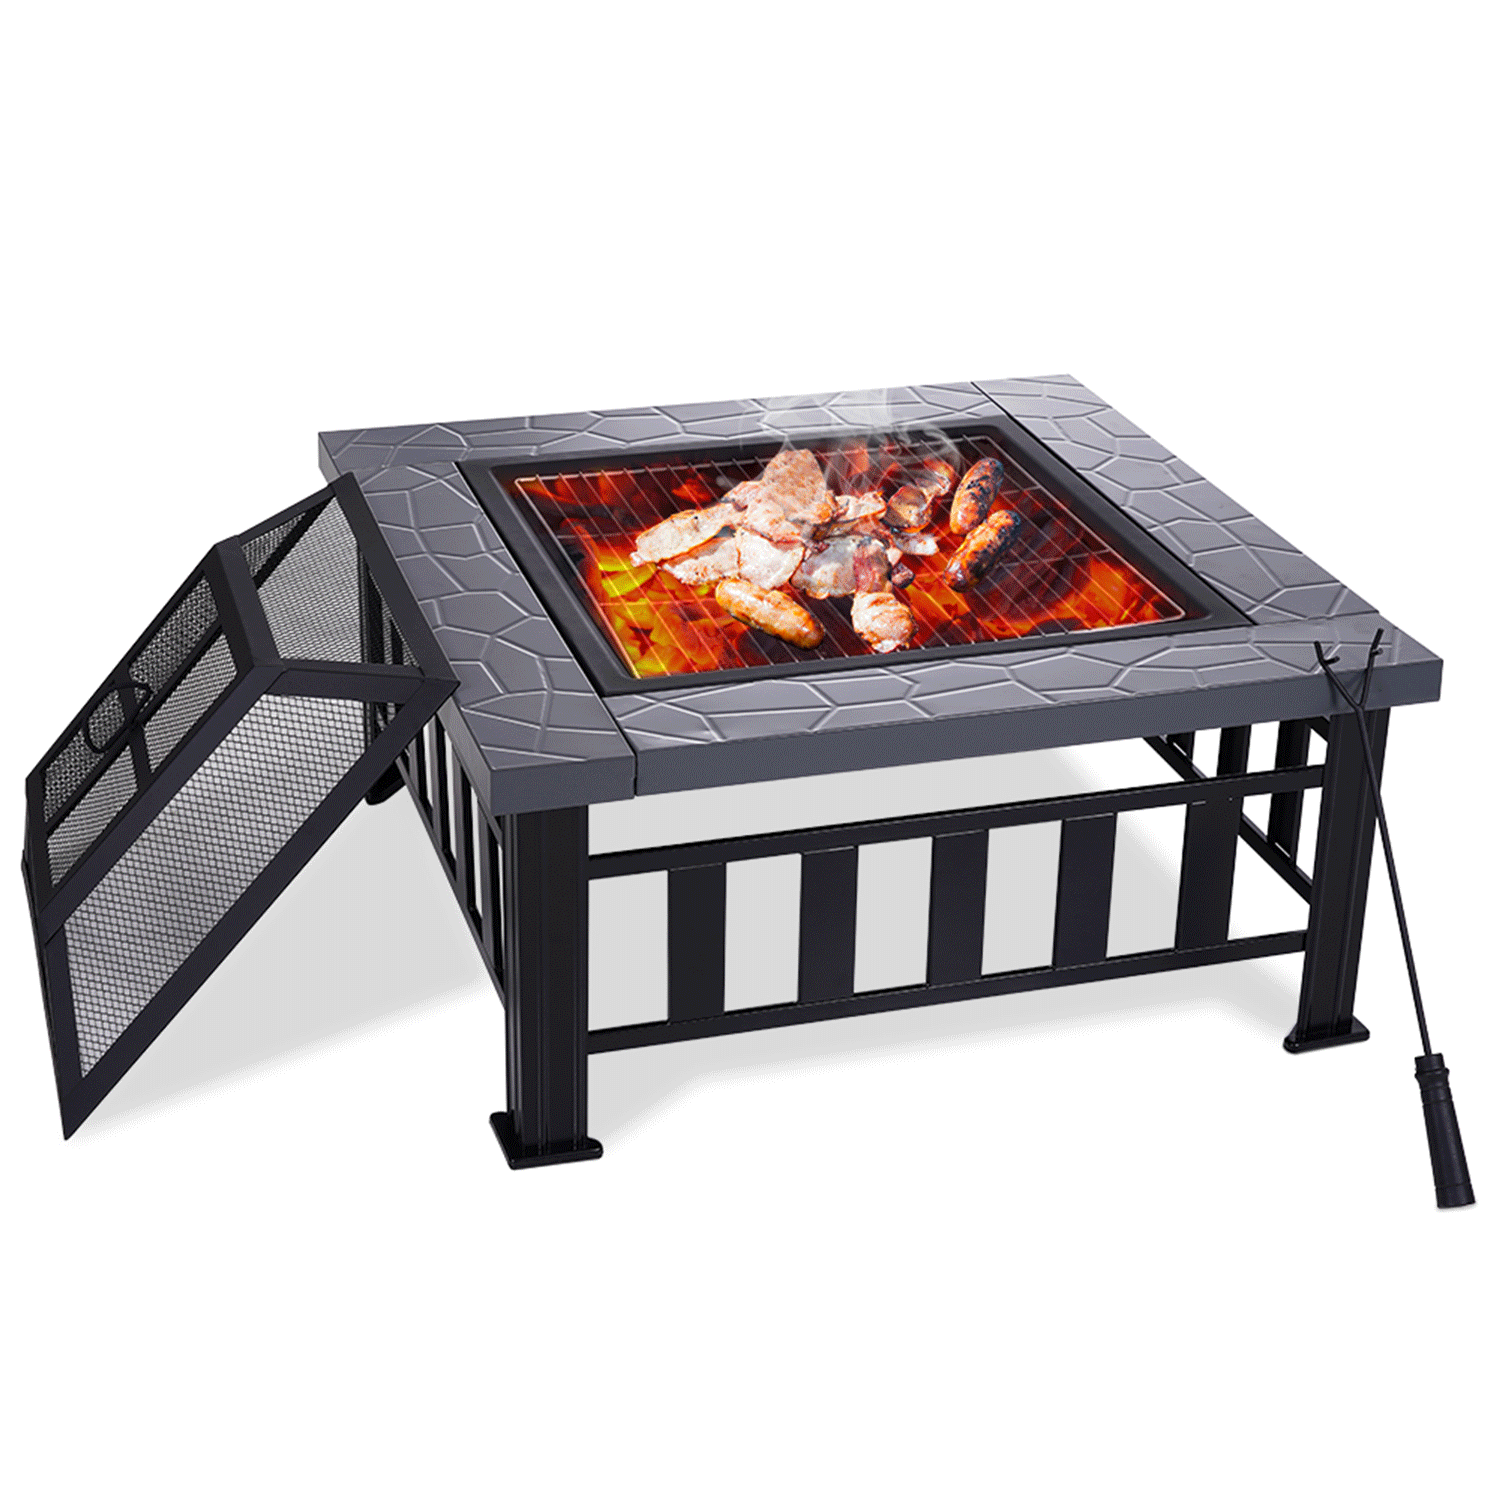 Swing-out Cast Iron Grill Heat Resistant Outdoor Cooking Pit Grill  Cleaning 